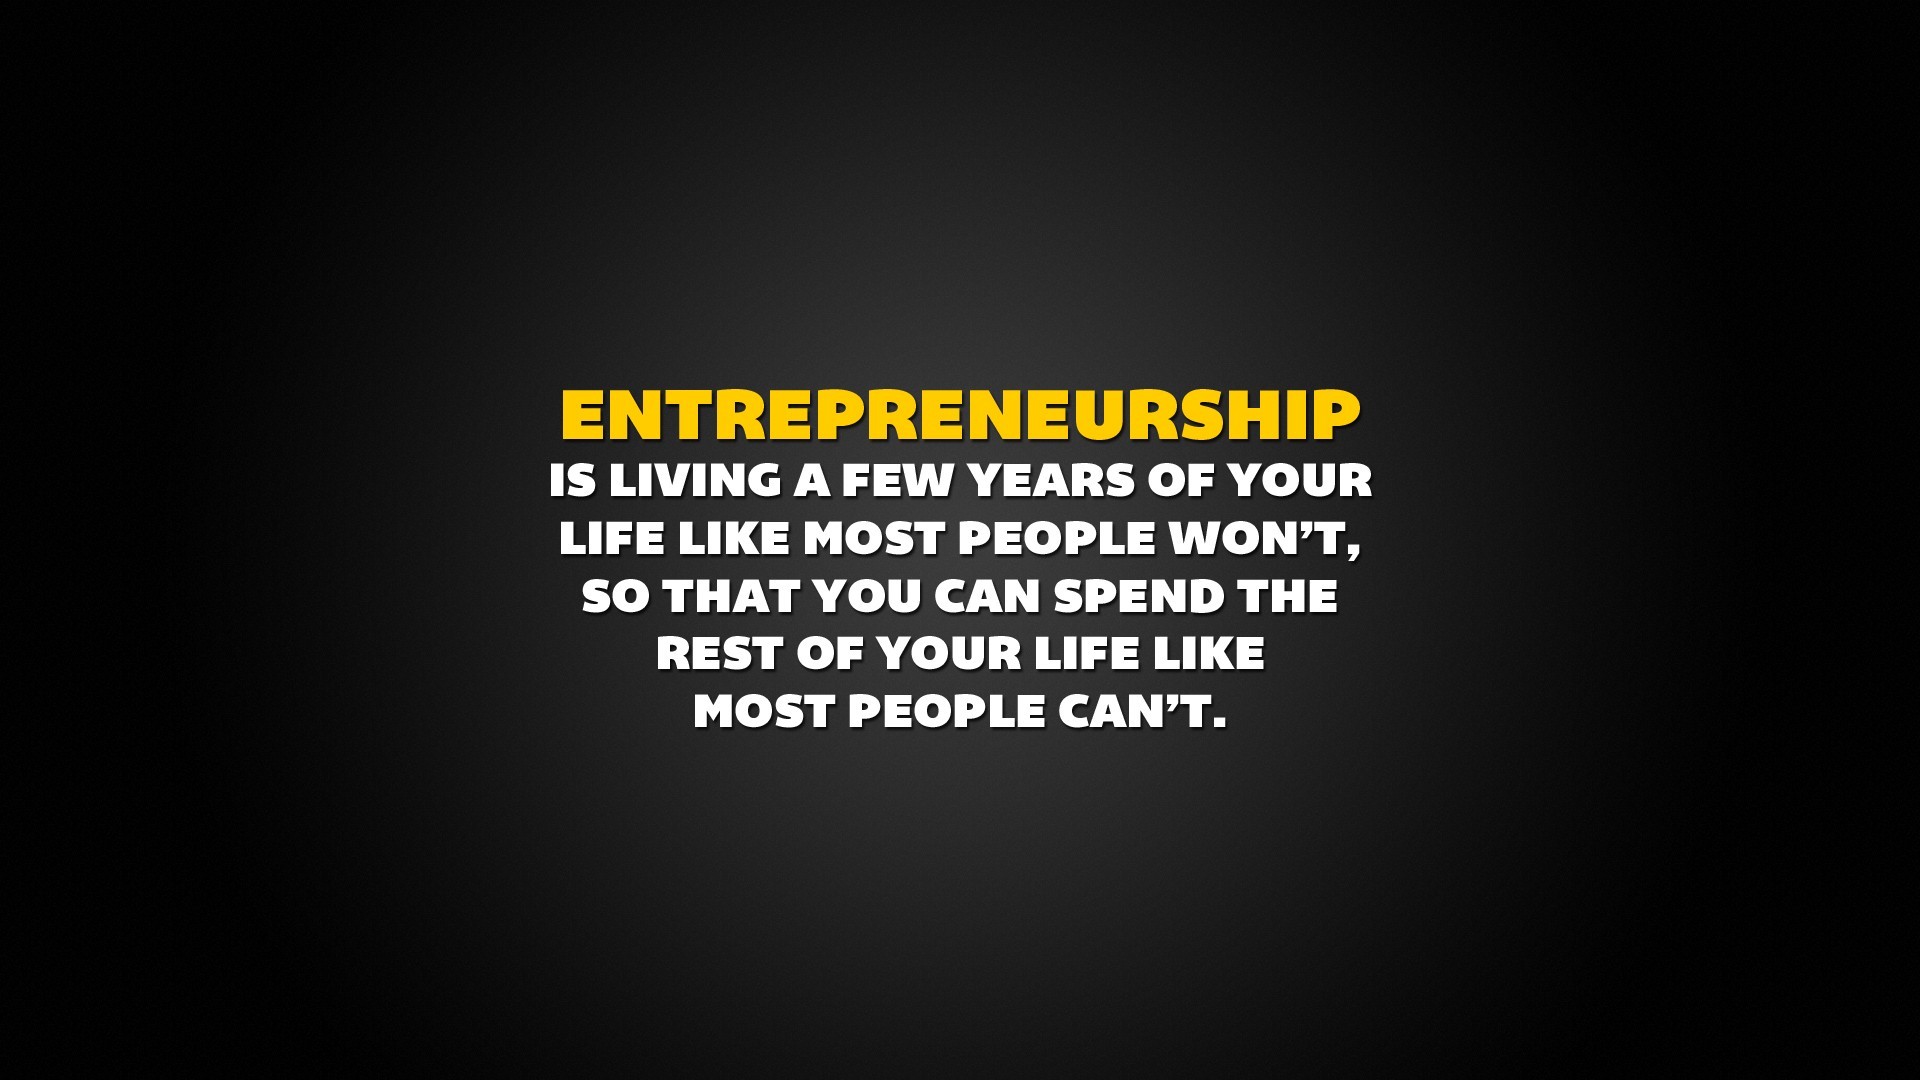 Entrepreneurship Quotes Images Wallpapers